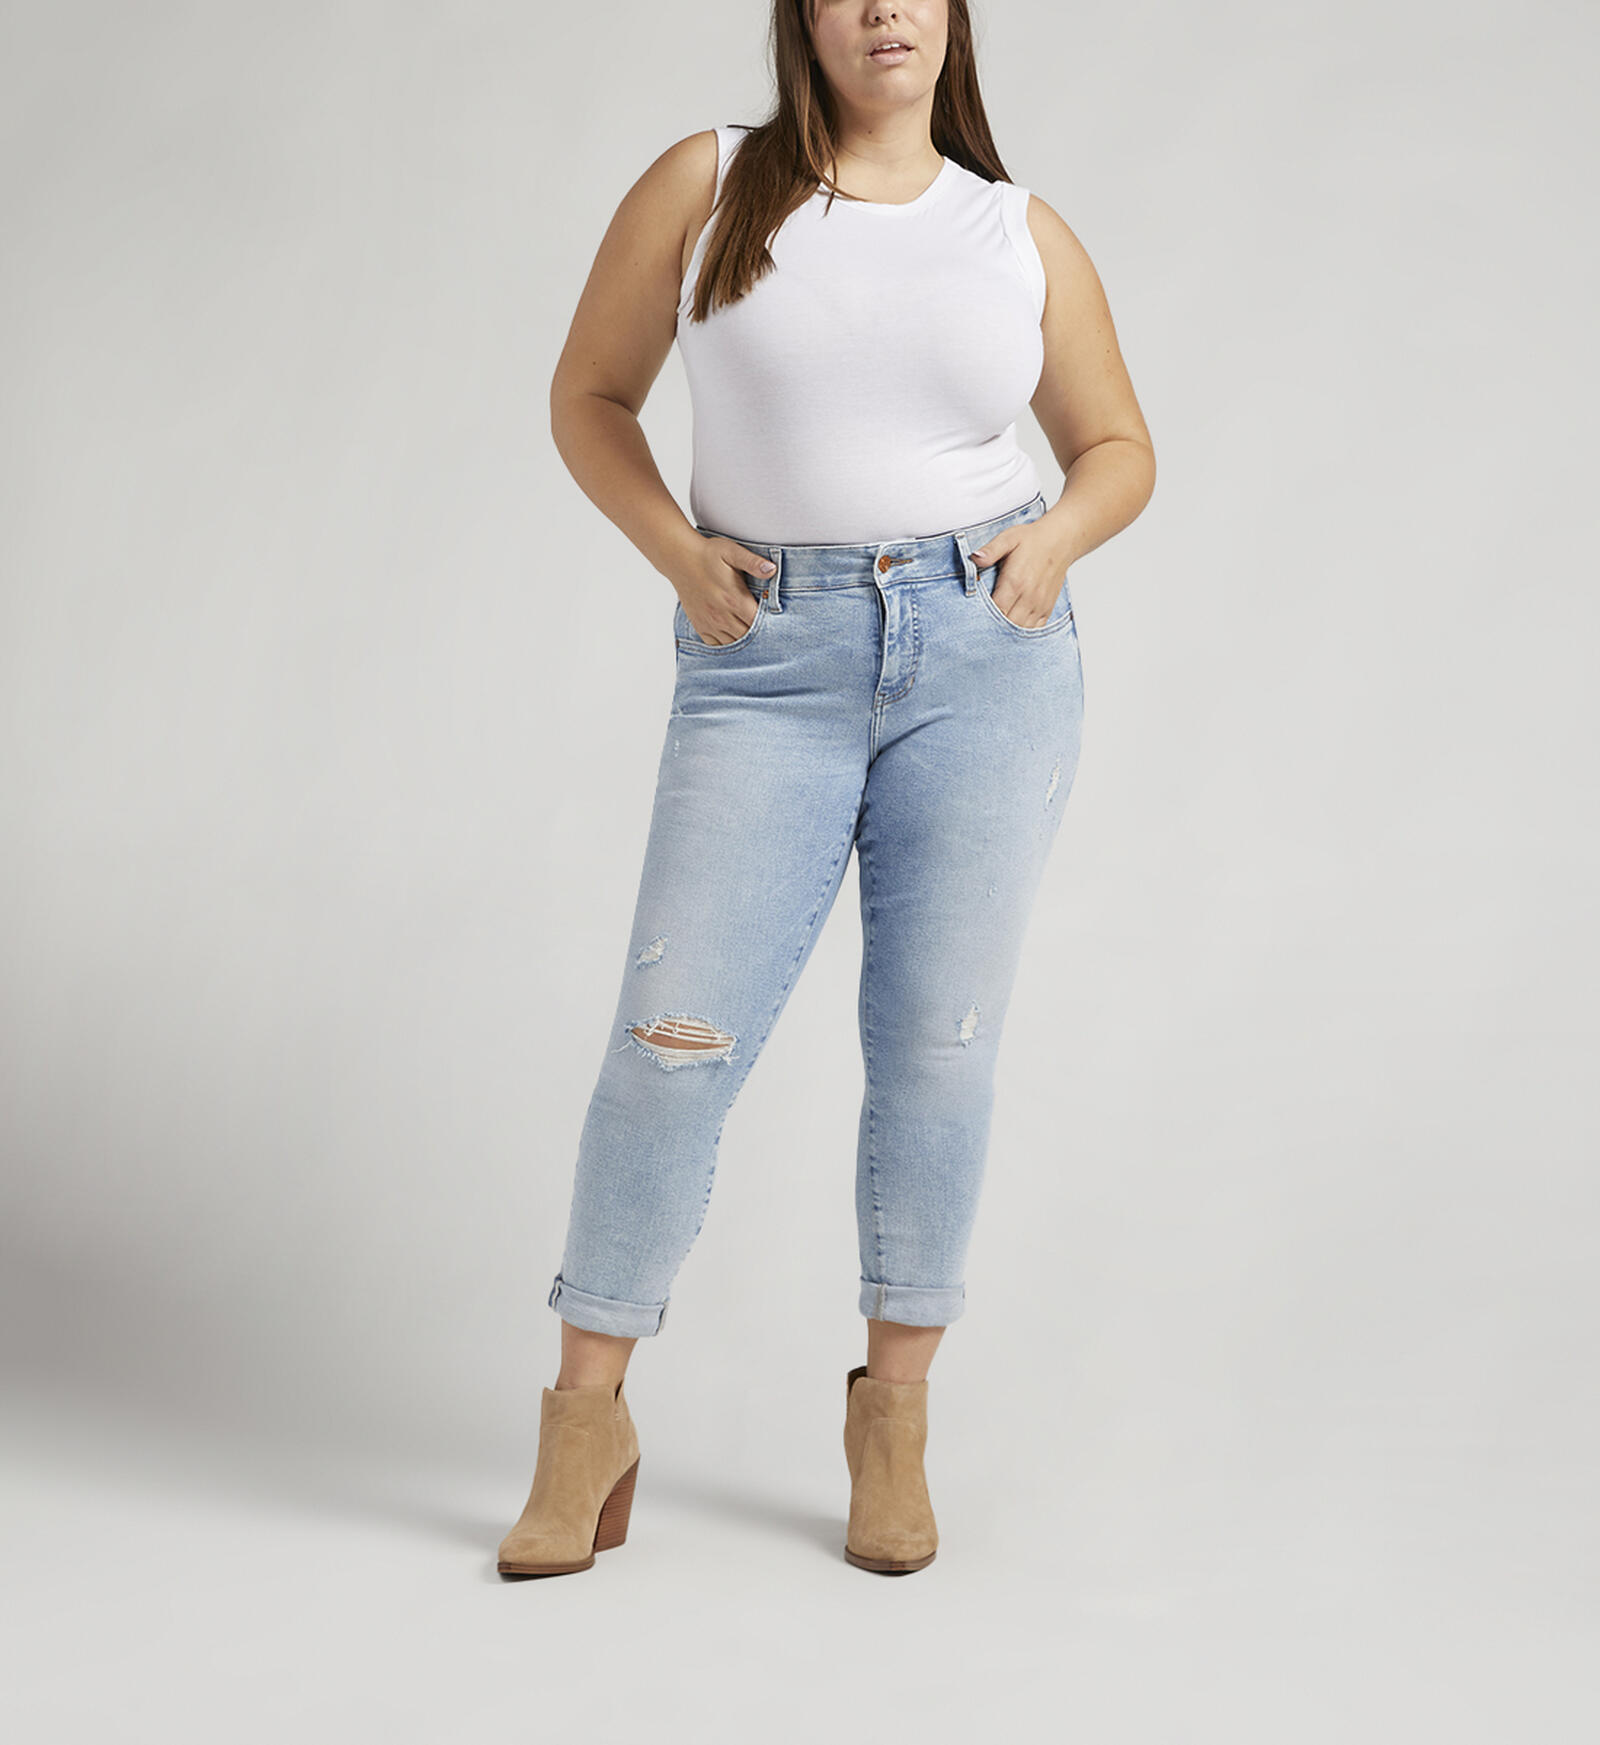 Buy Carter Mid Rise Girlfriend Jeans Plus Size for CAD 108.00